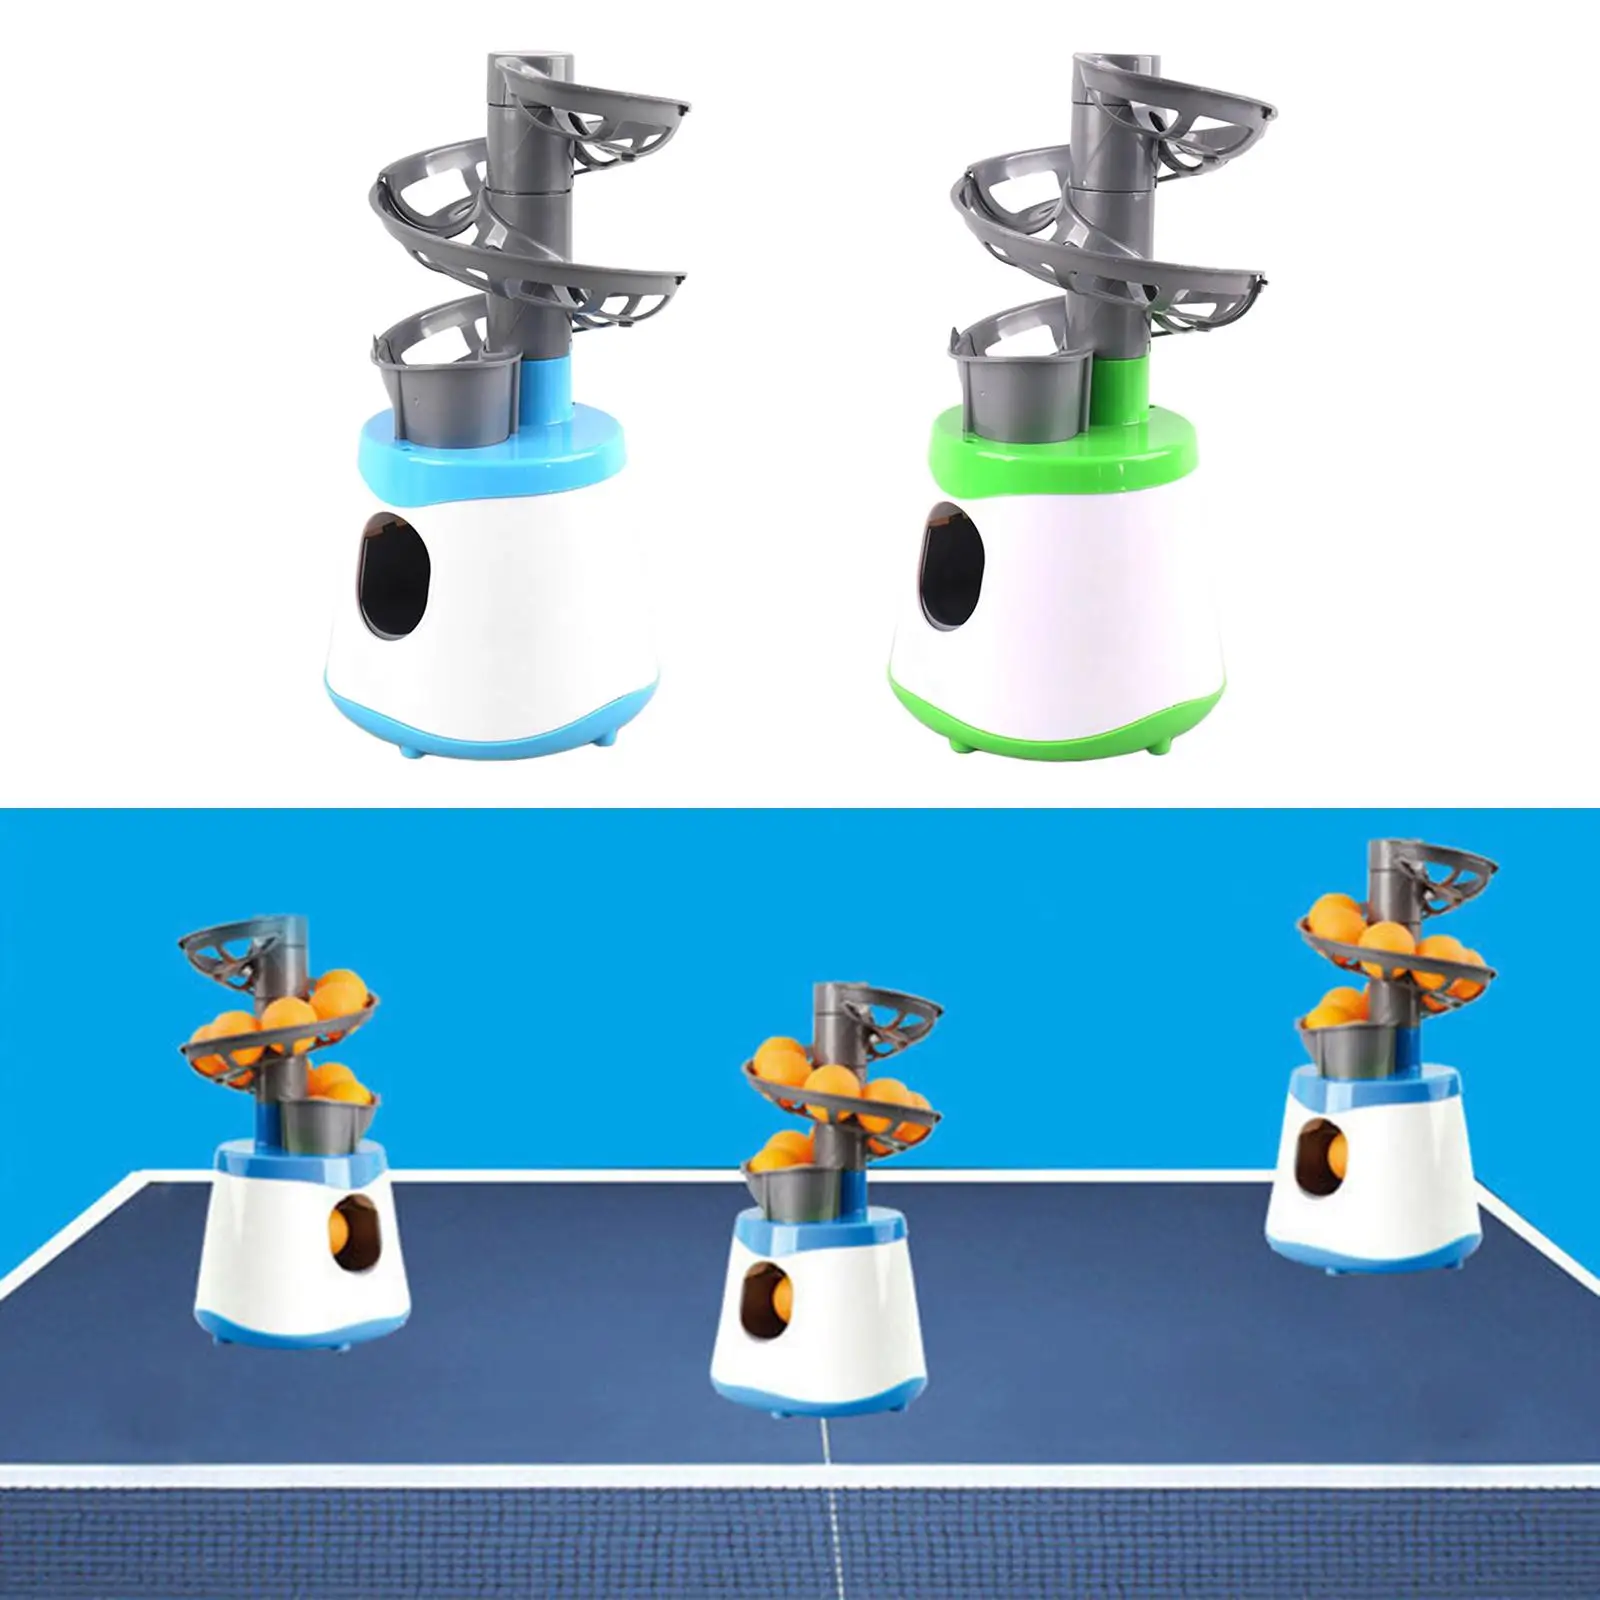 Table Tennis Robots PingPong Automatic Ball Machine Training Kids Beignners